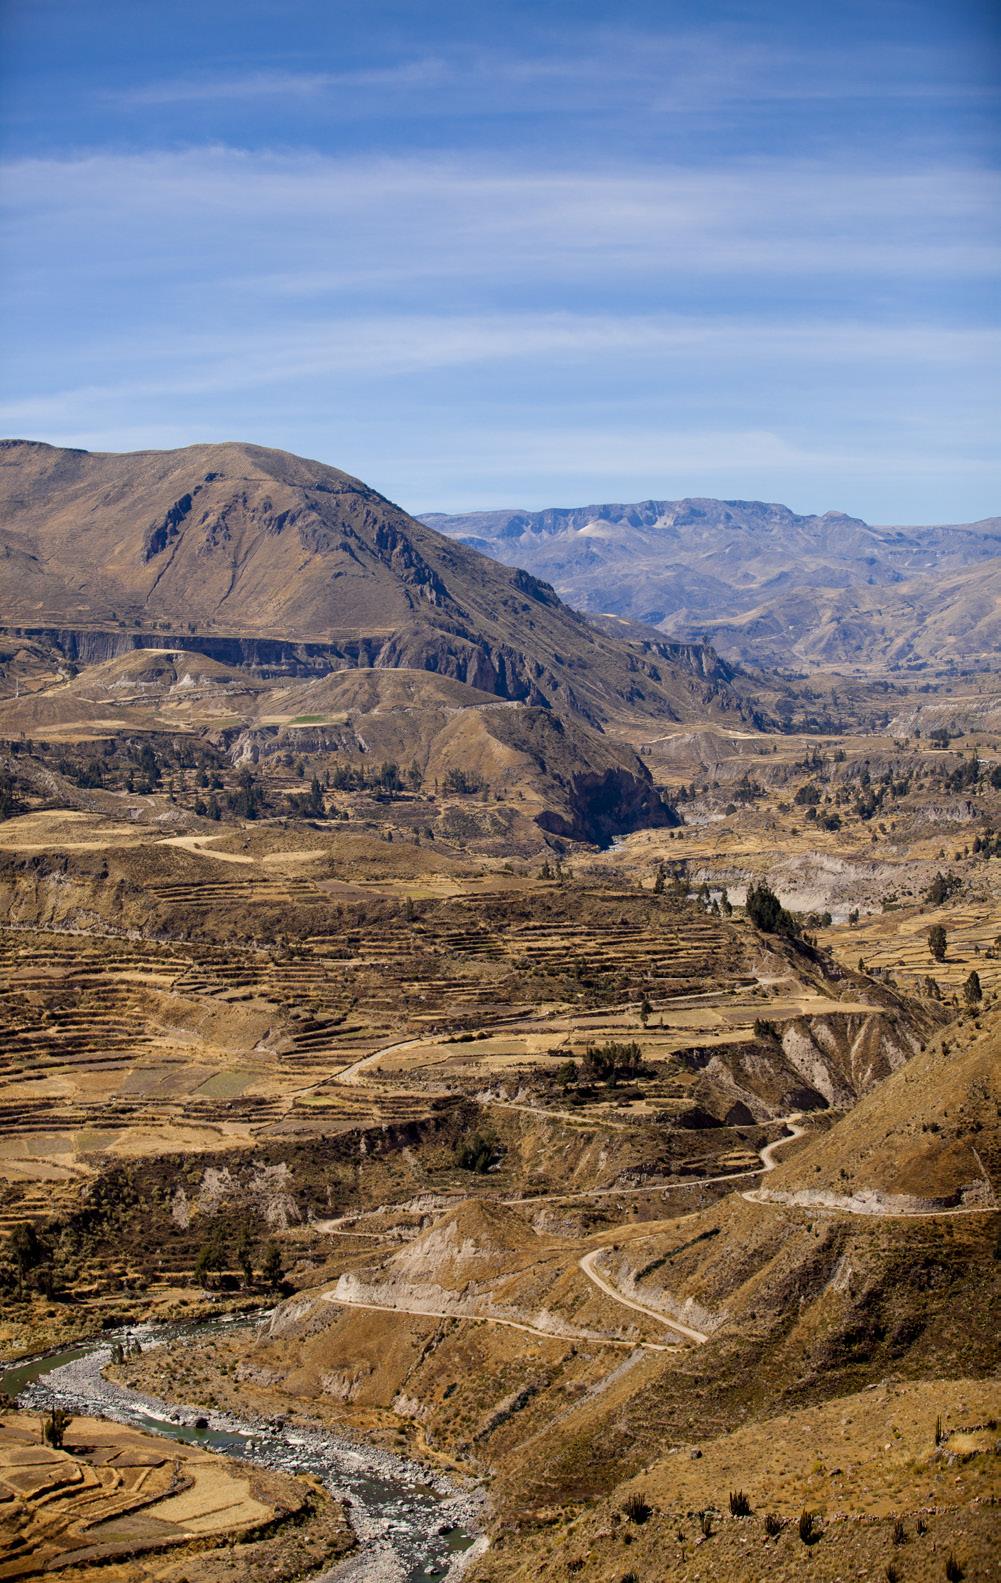 Day 14 Colca Canyon to Arequipa. After an early start we head for the Cruz del Condor, a magnificent viewpoint overlooking one of the deepest sections of the Colca Canyon.